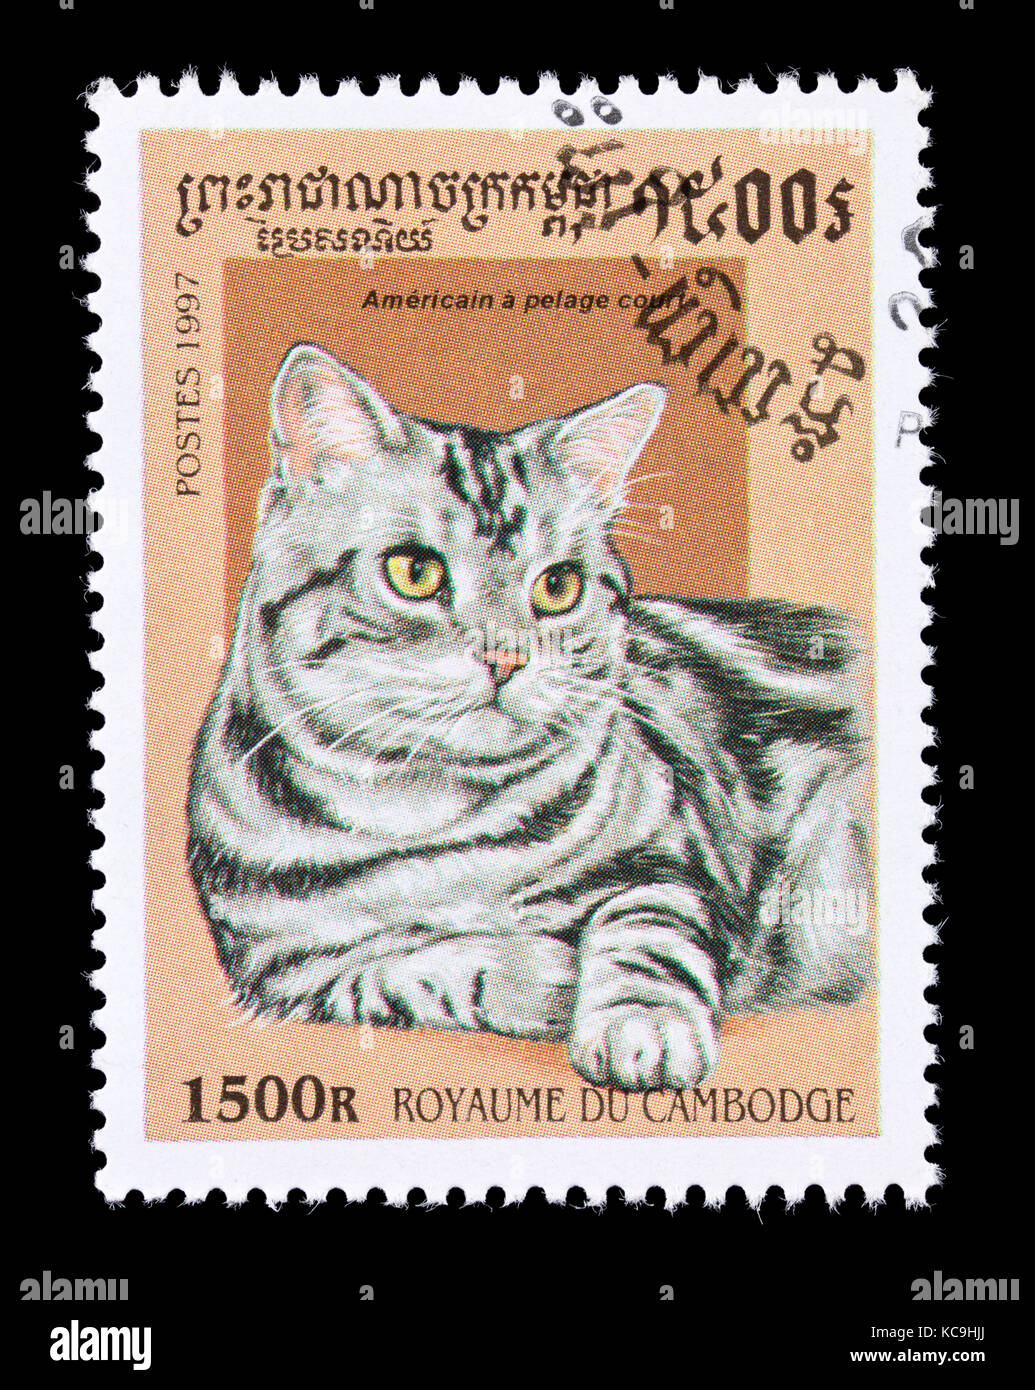 Postage stamp from Cambodia depicting a American short-haired breed of housecat. Stock Photo